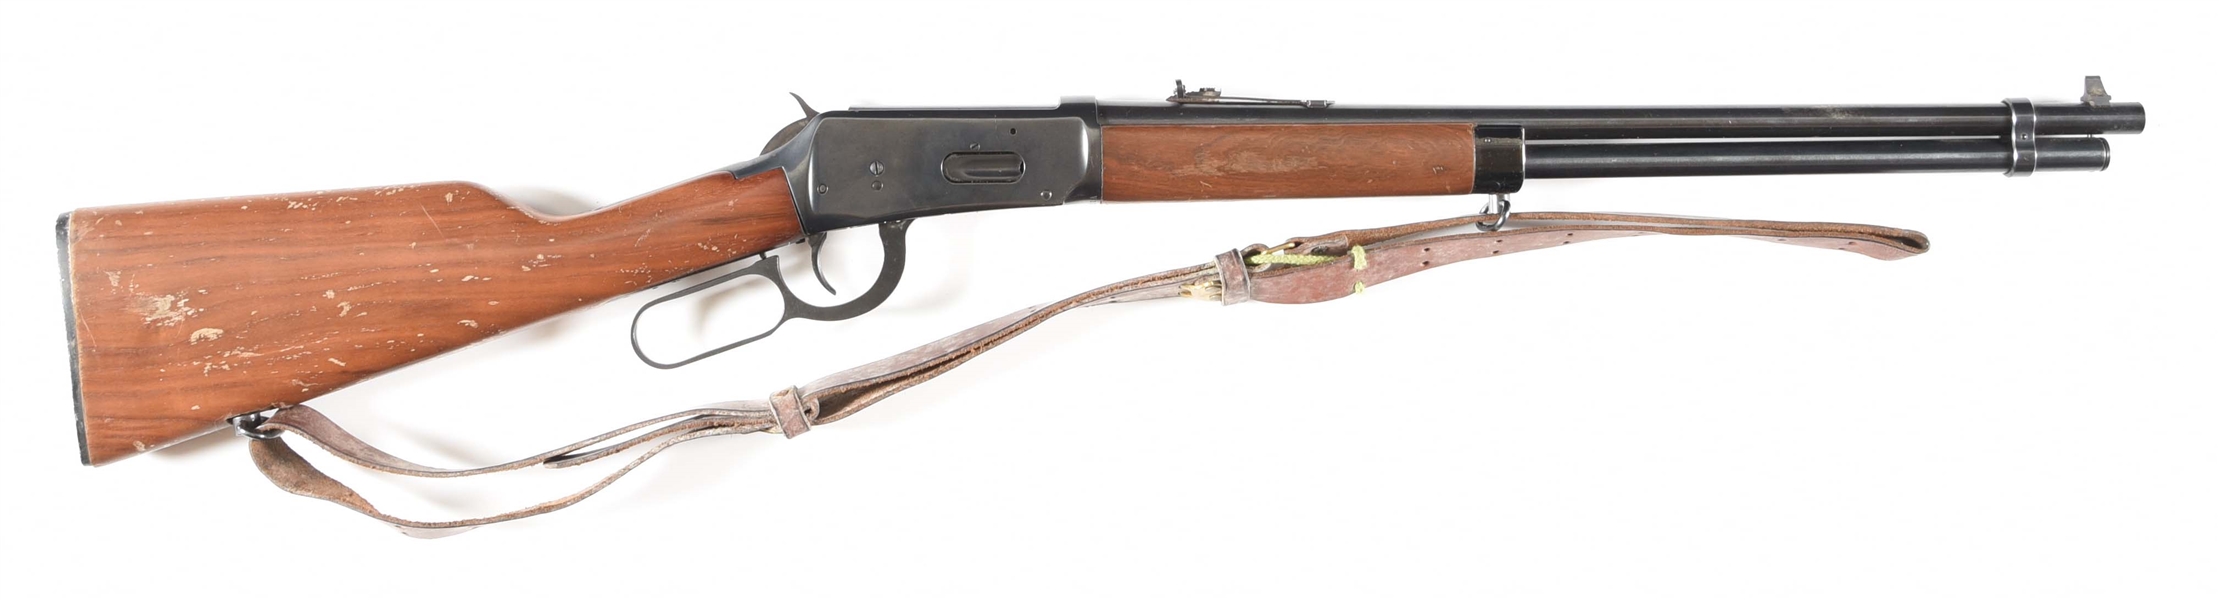 (M) TED WILLIAMS MODEL 100 LEVER ACTION RIFLE.